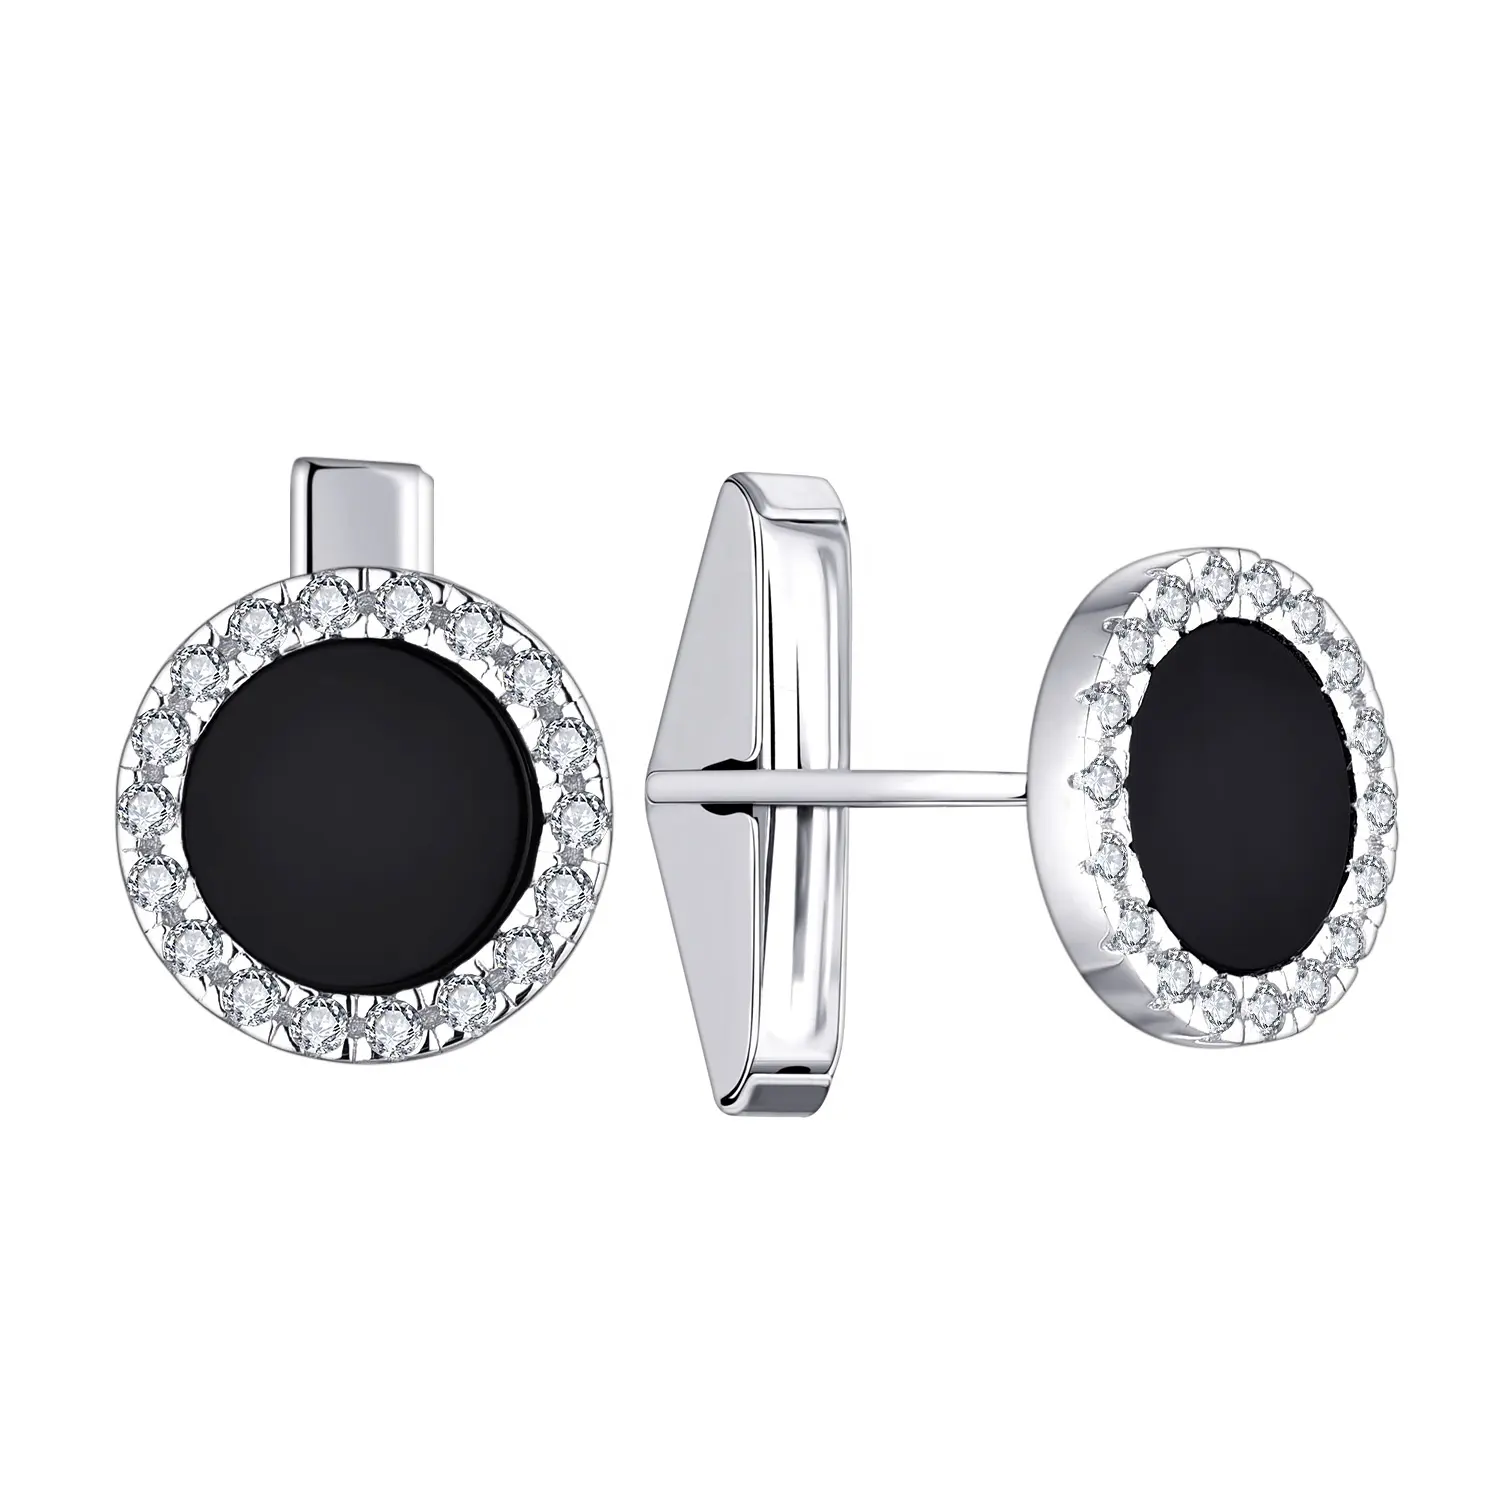 Round/Square/Rectangle/Oval Cuff Links 925 Sterling Silver Black Cufflinks for Men, custom tie and cufflinks set for men